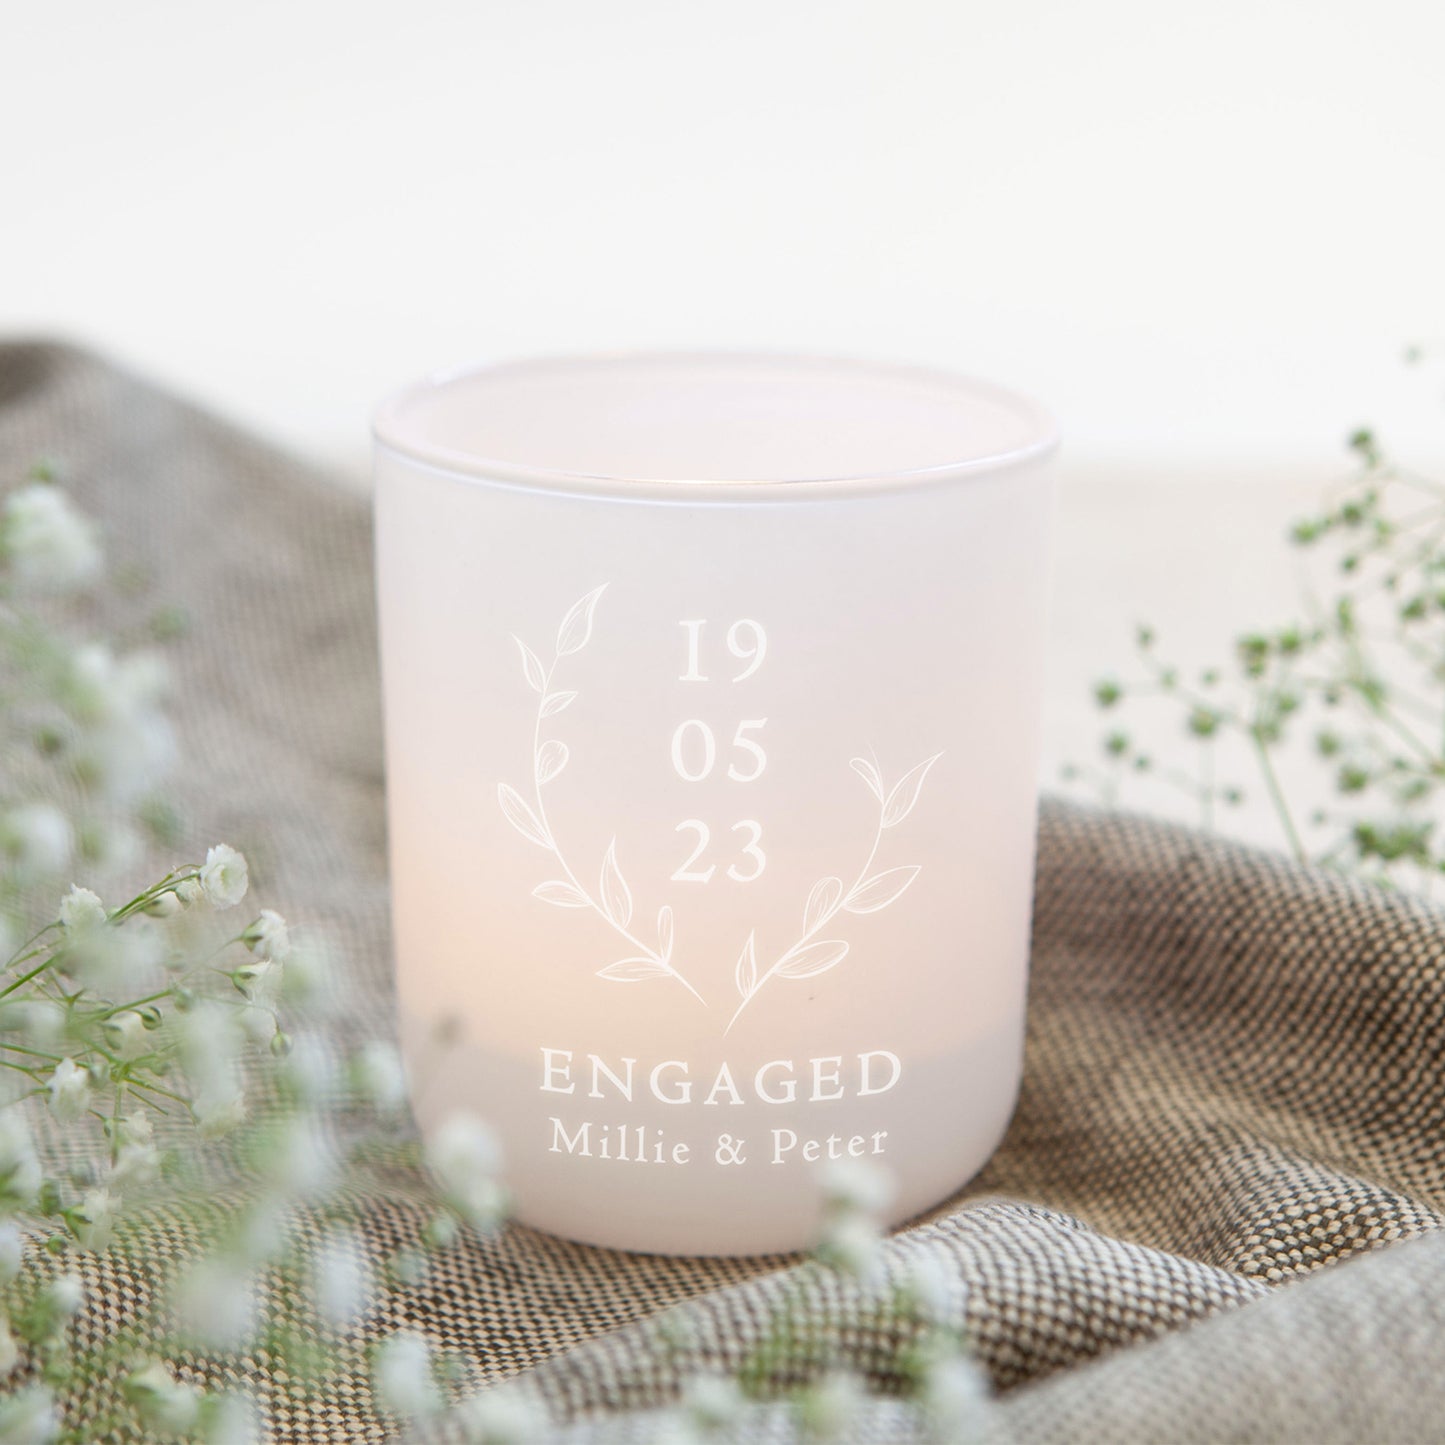 Engagement Keepsake Date Gift Personalised Tea Light Holder with Candles